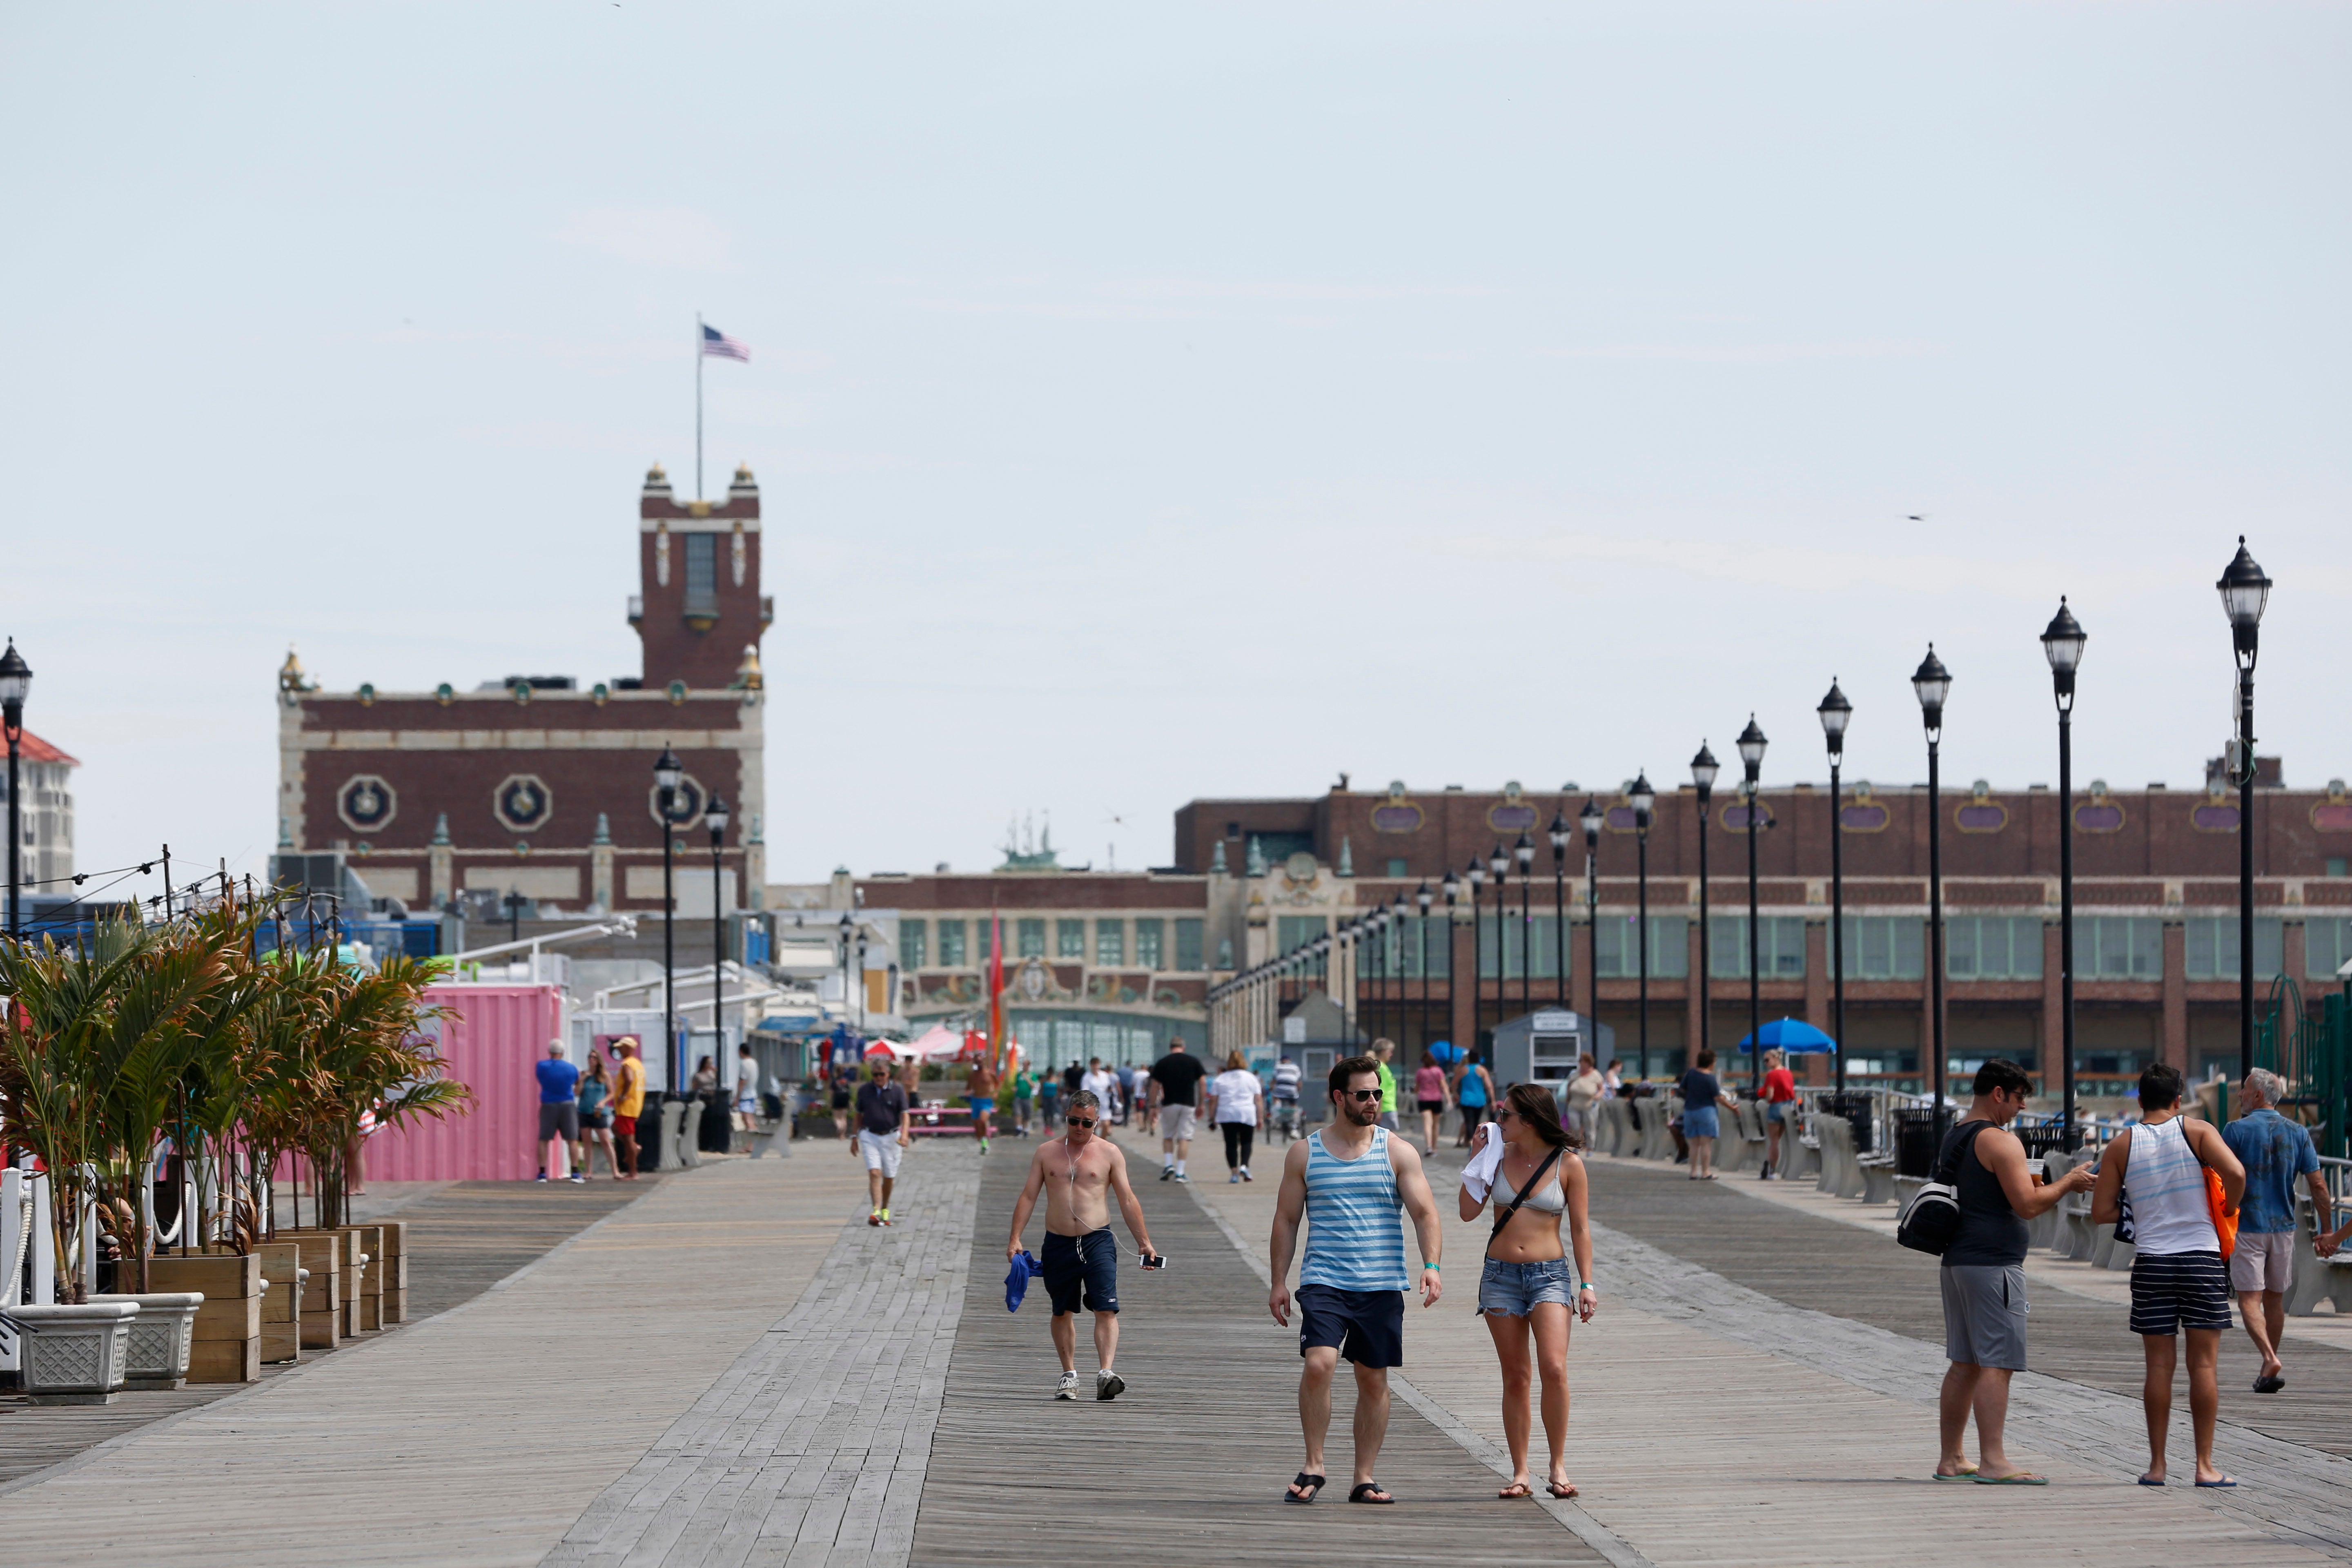 Despite N.J. orders, Asbury Park to allow indoor dining on June 15 WHYY